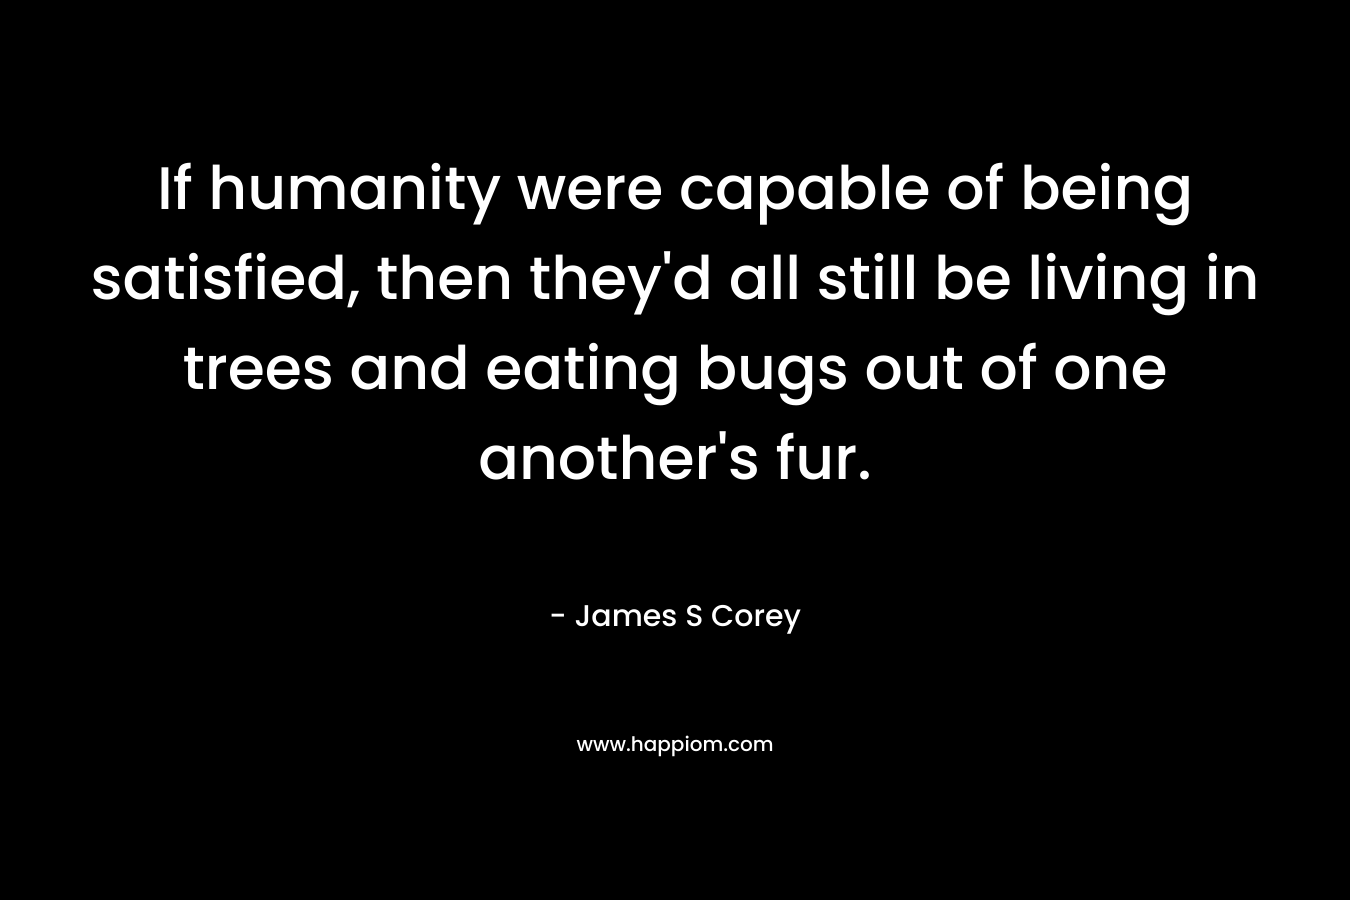 If humanity were capable of being satisfied, then they’d all still be living in trees and eating bugs out of one another’s fur. – James S Corey